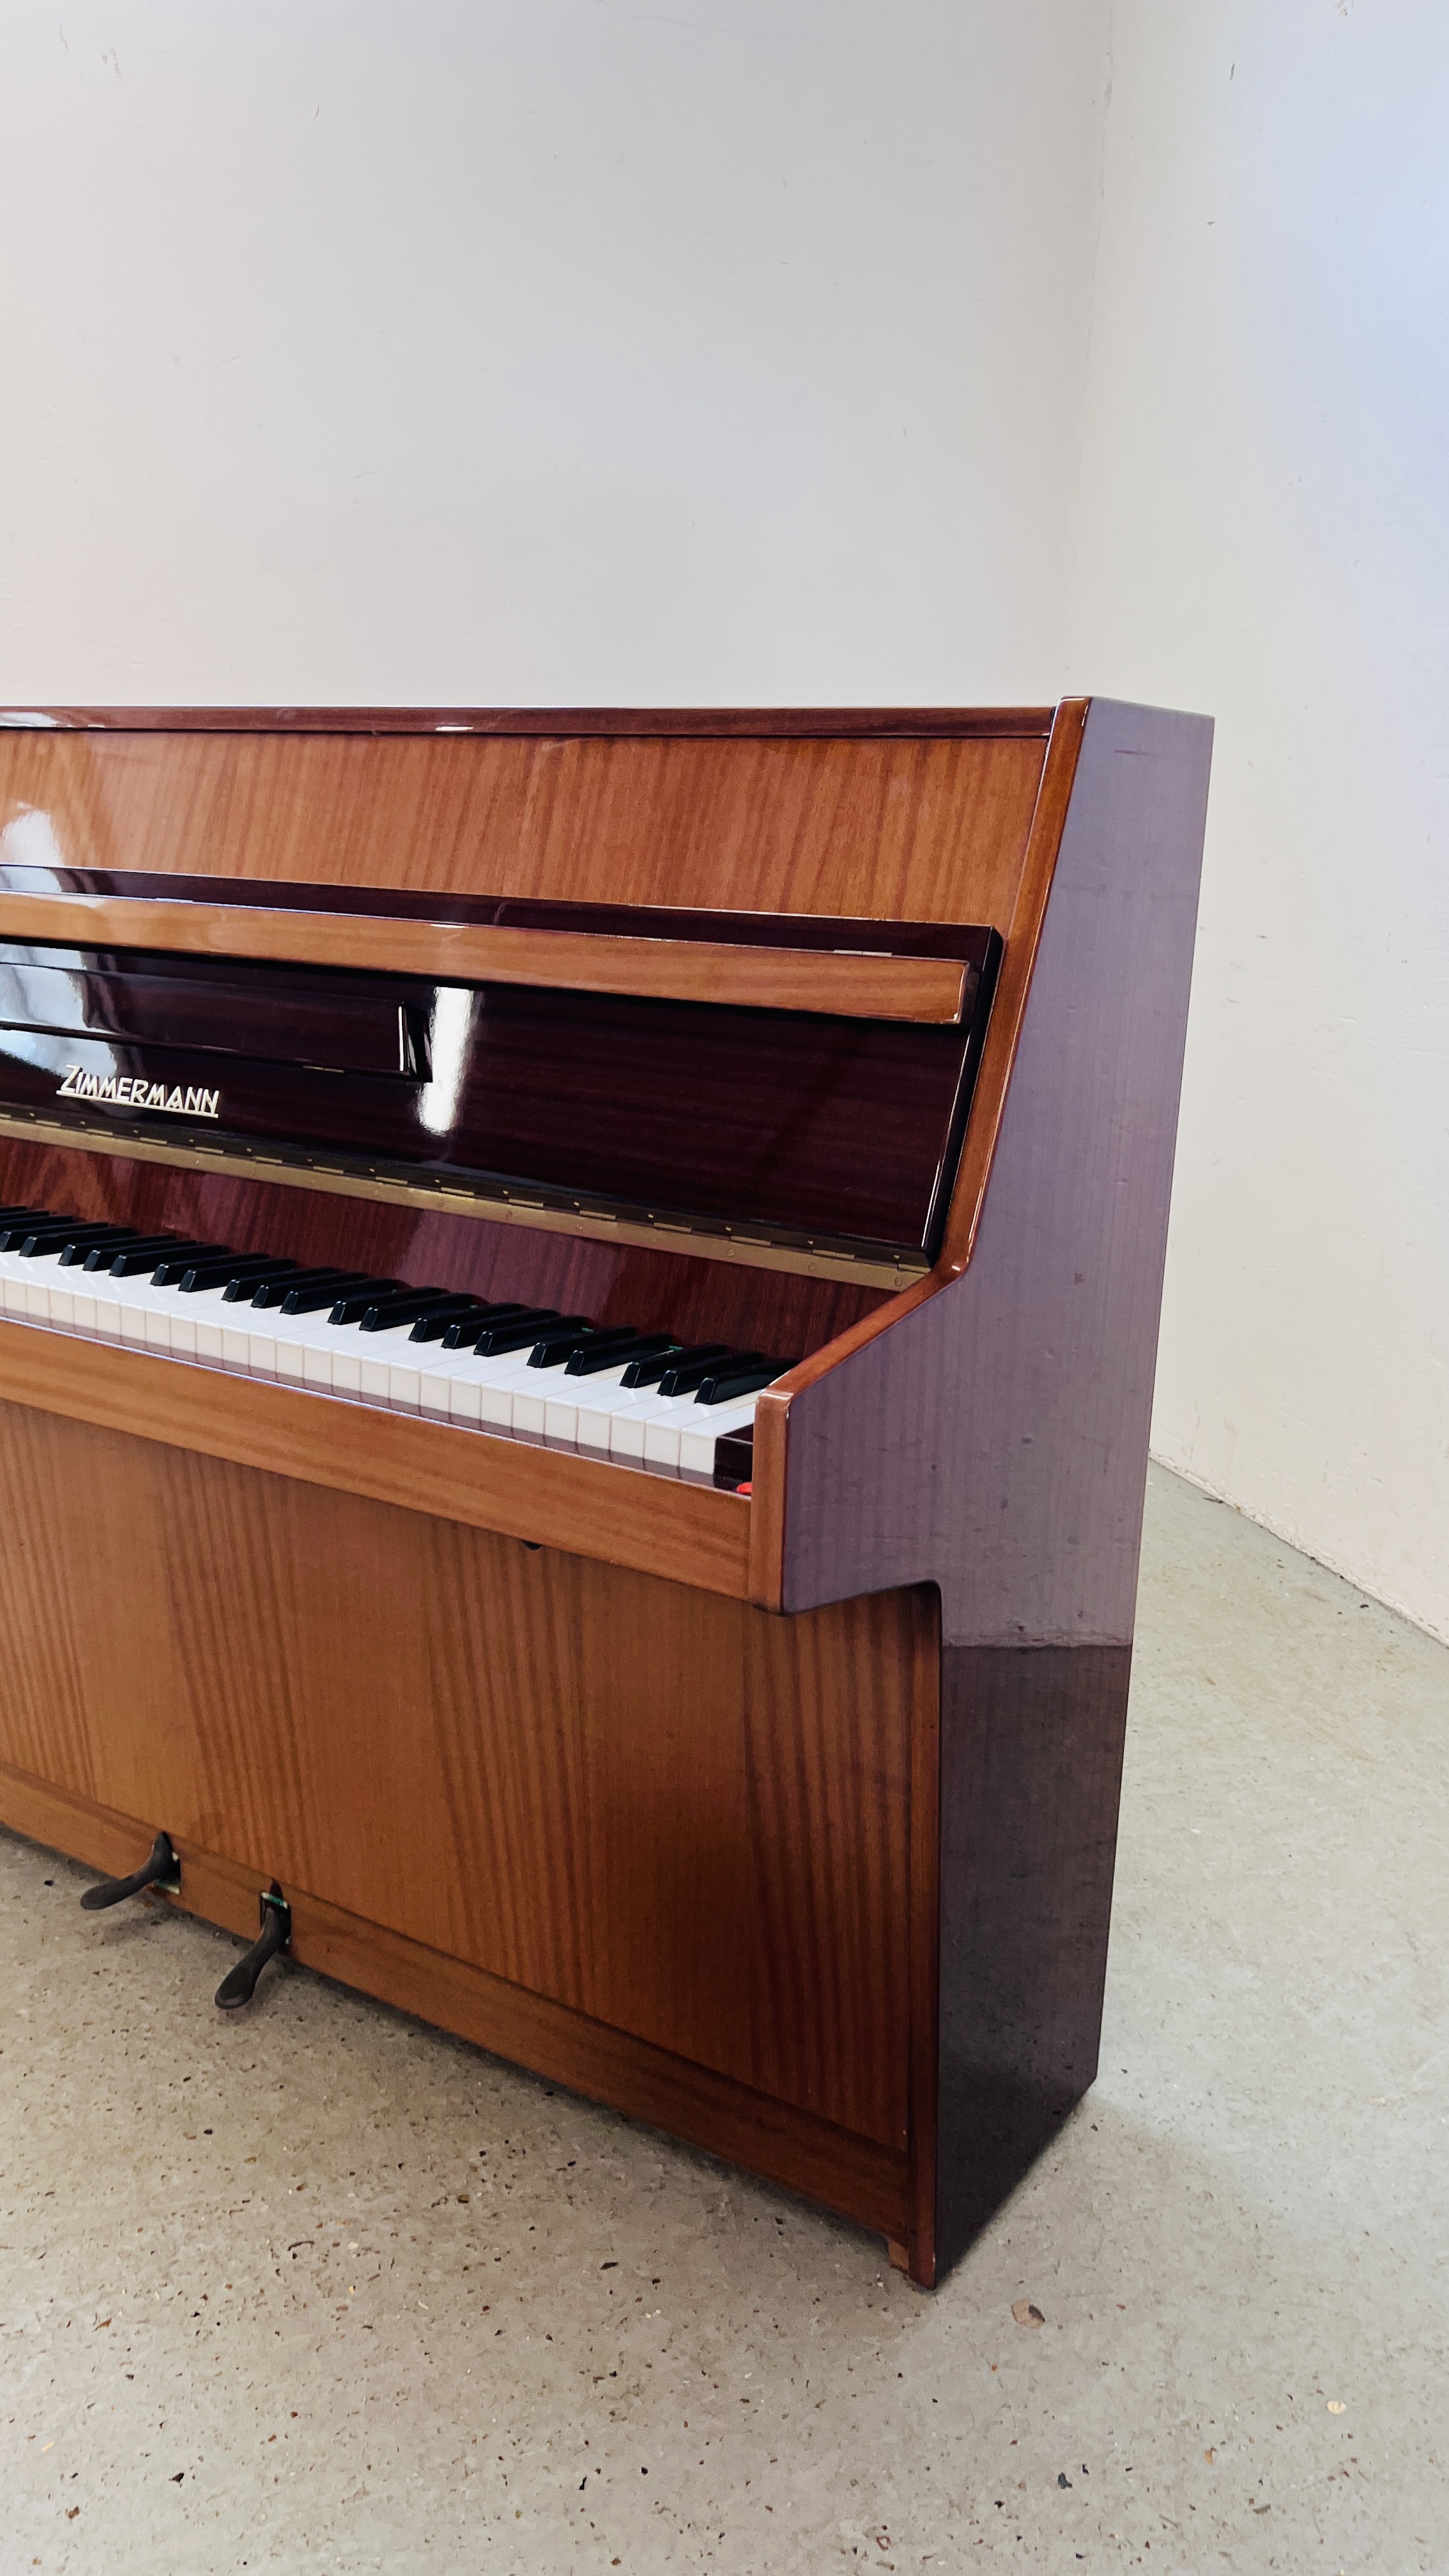 A ZIMMERMAN UPRIGHT PIANO AND STOOL W 142CM X D 53CM X H 108CM - Image 3 of 20